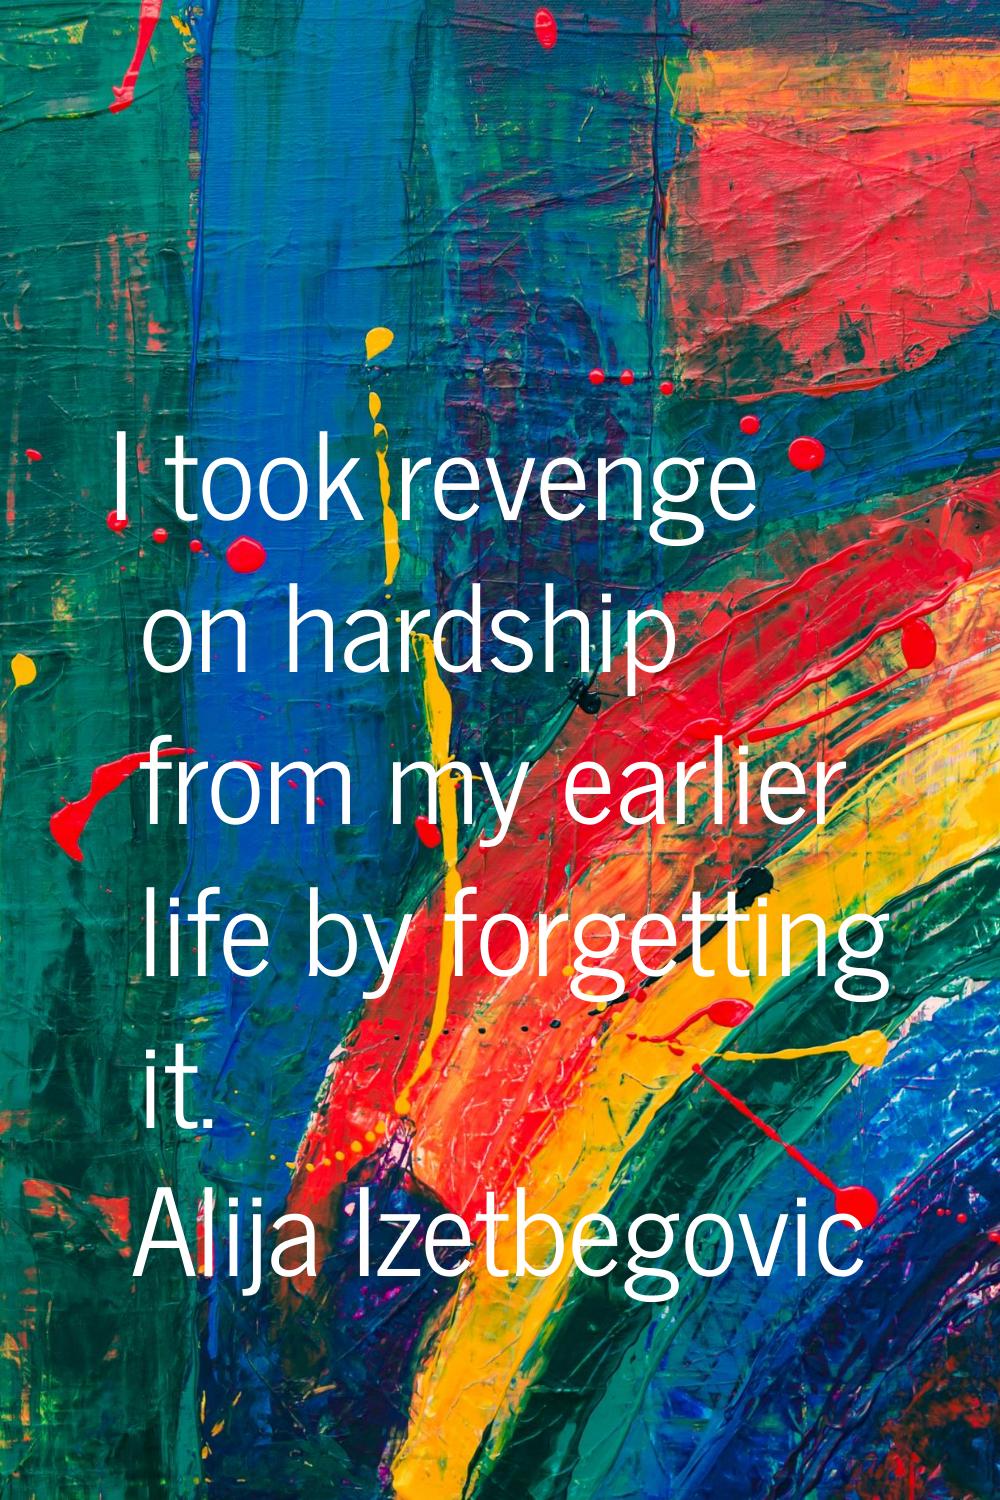 I took revenge on hardship from my earlier life by forgetting it.